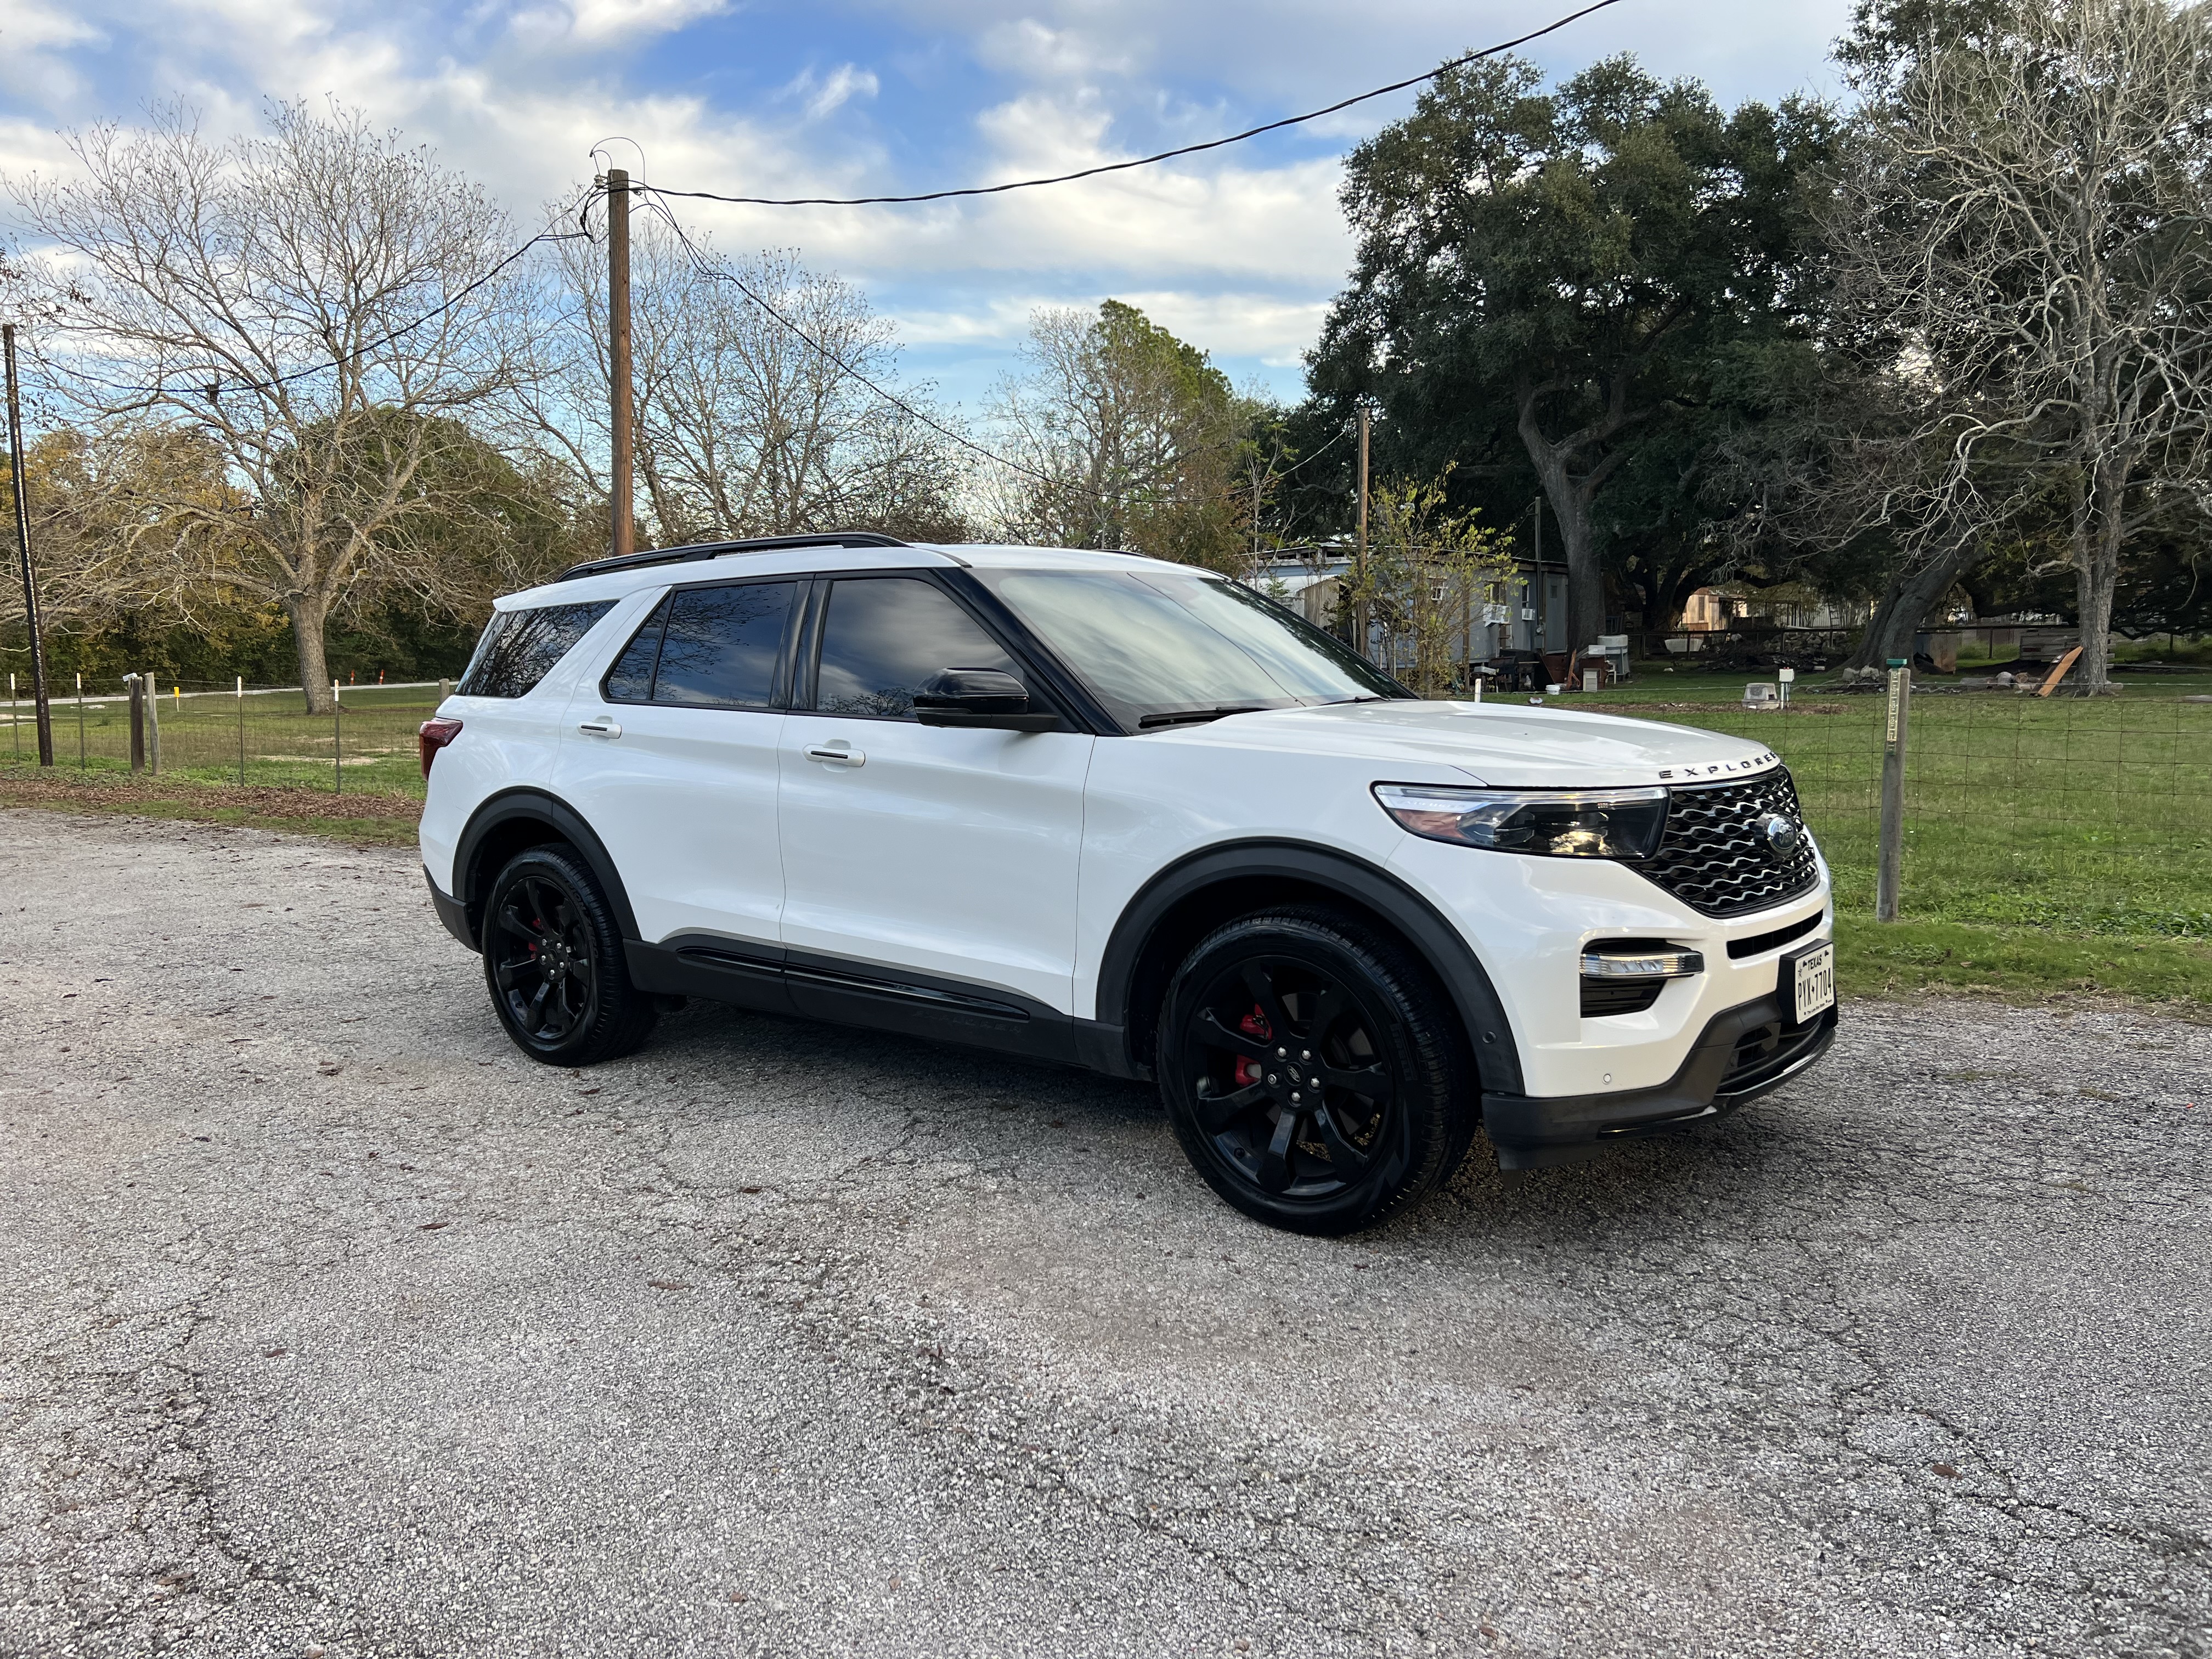 Used 2020 Ford Explorer for Sale Right Now - Autotrader